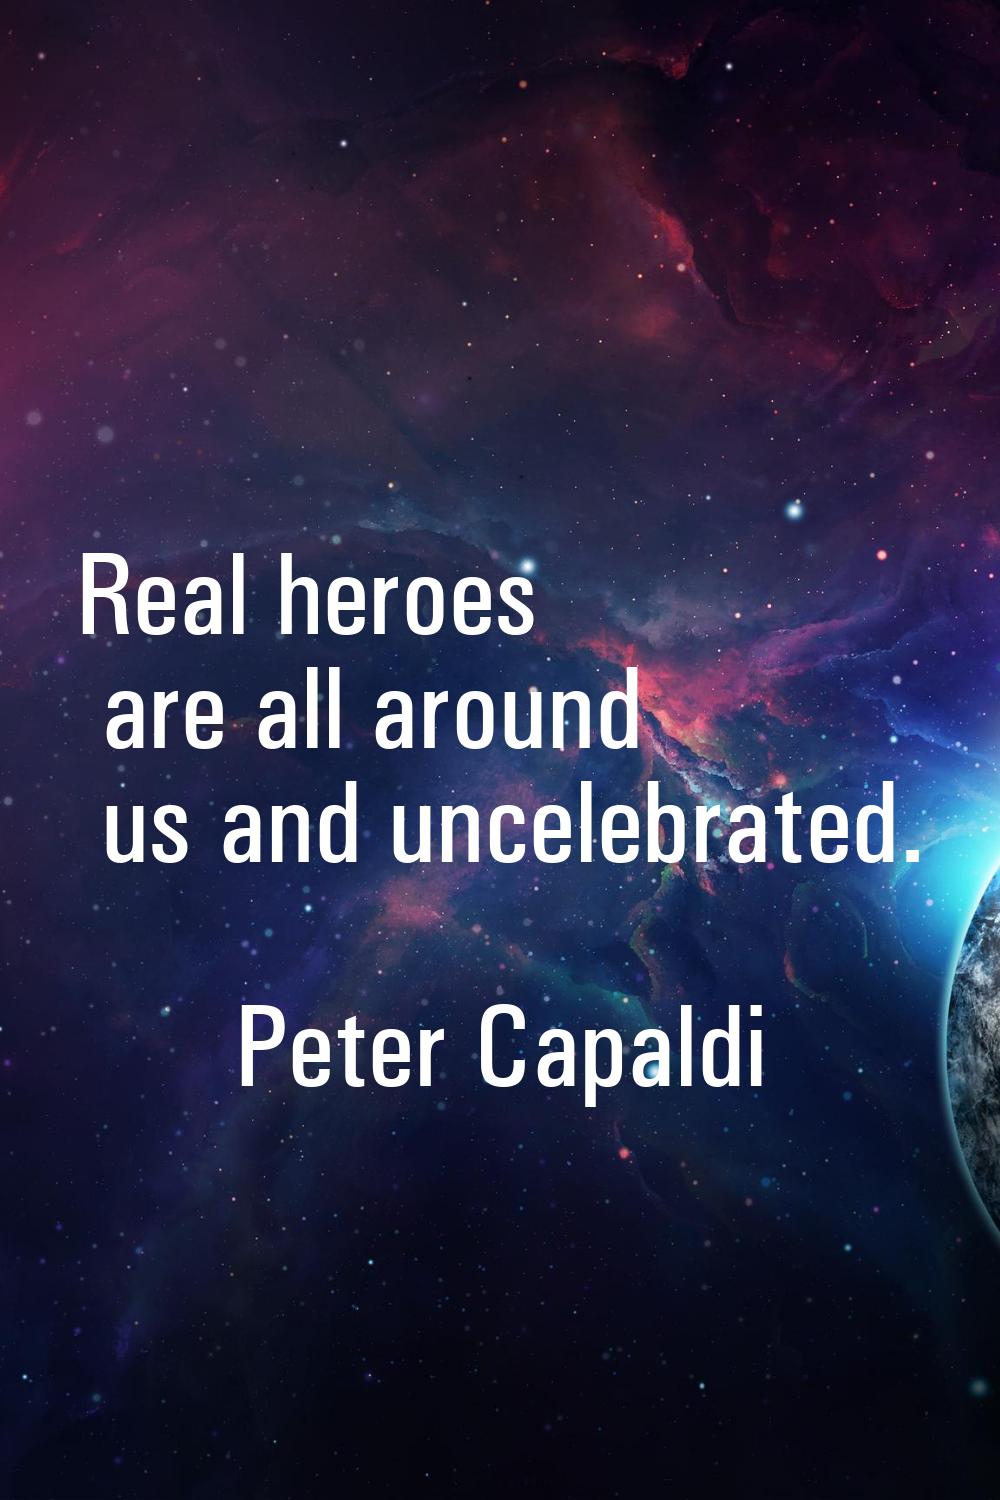 Real heroes are all around us and uncelebrated.